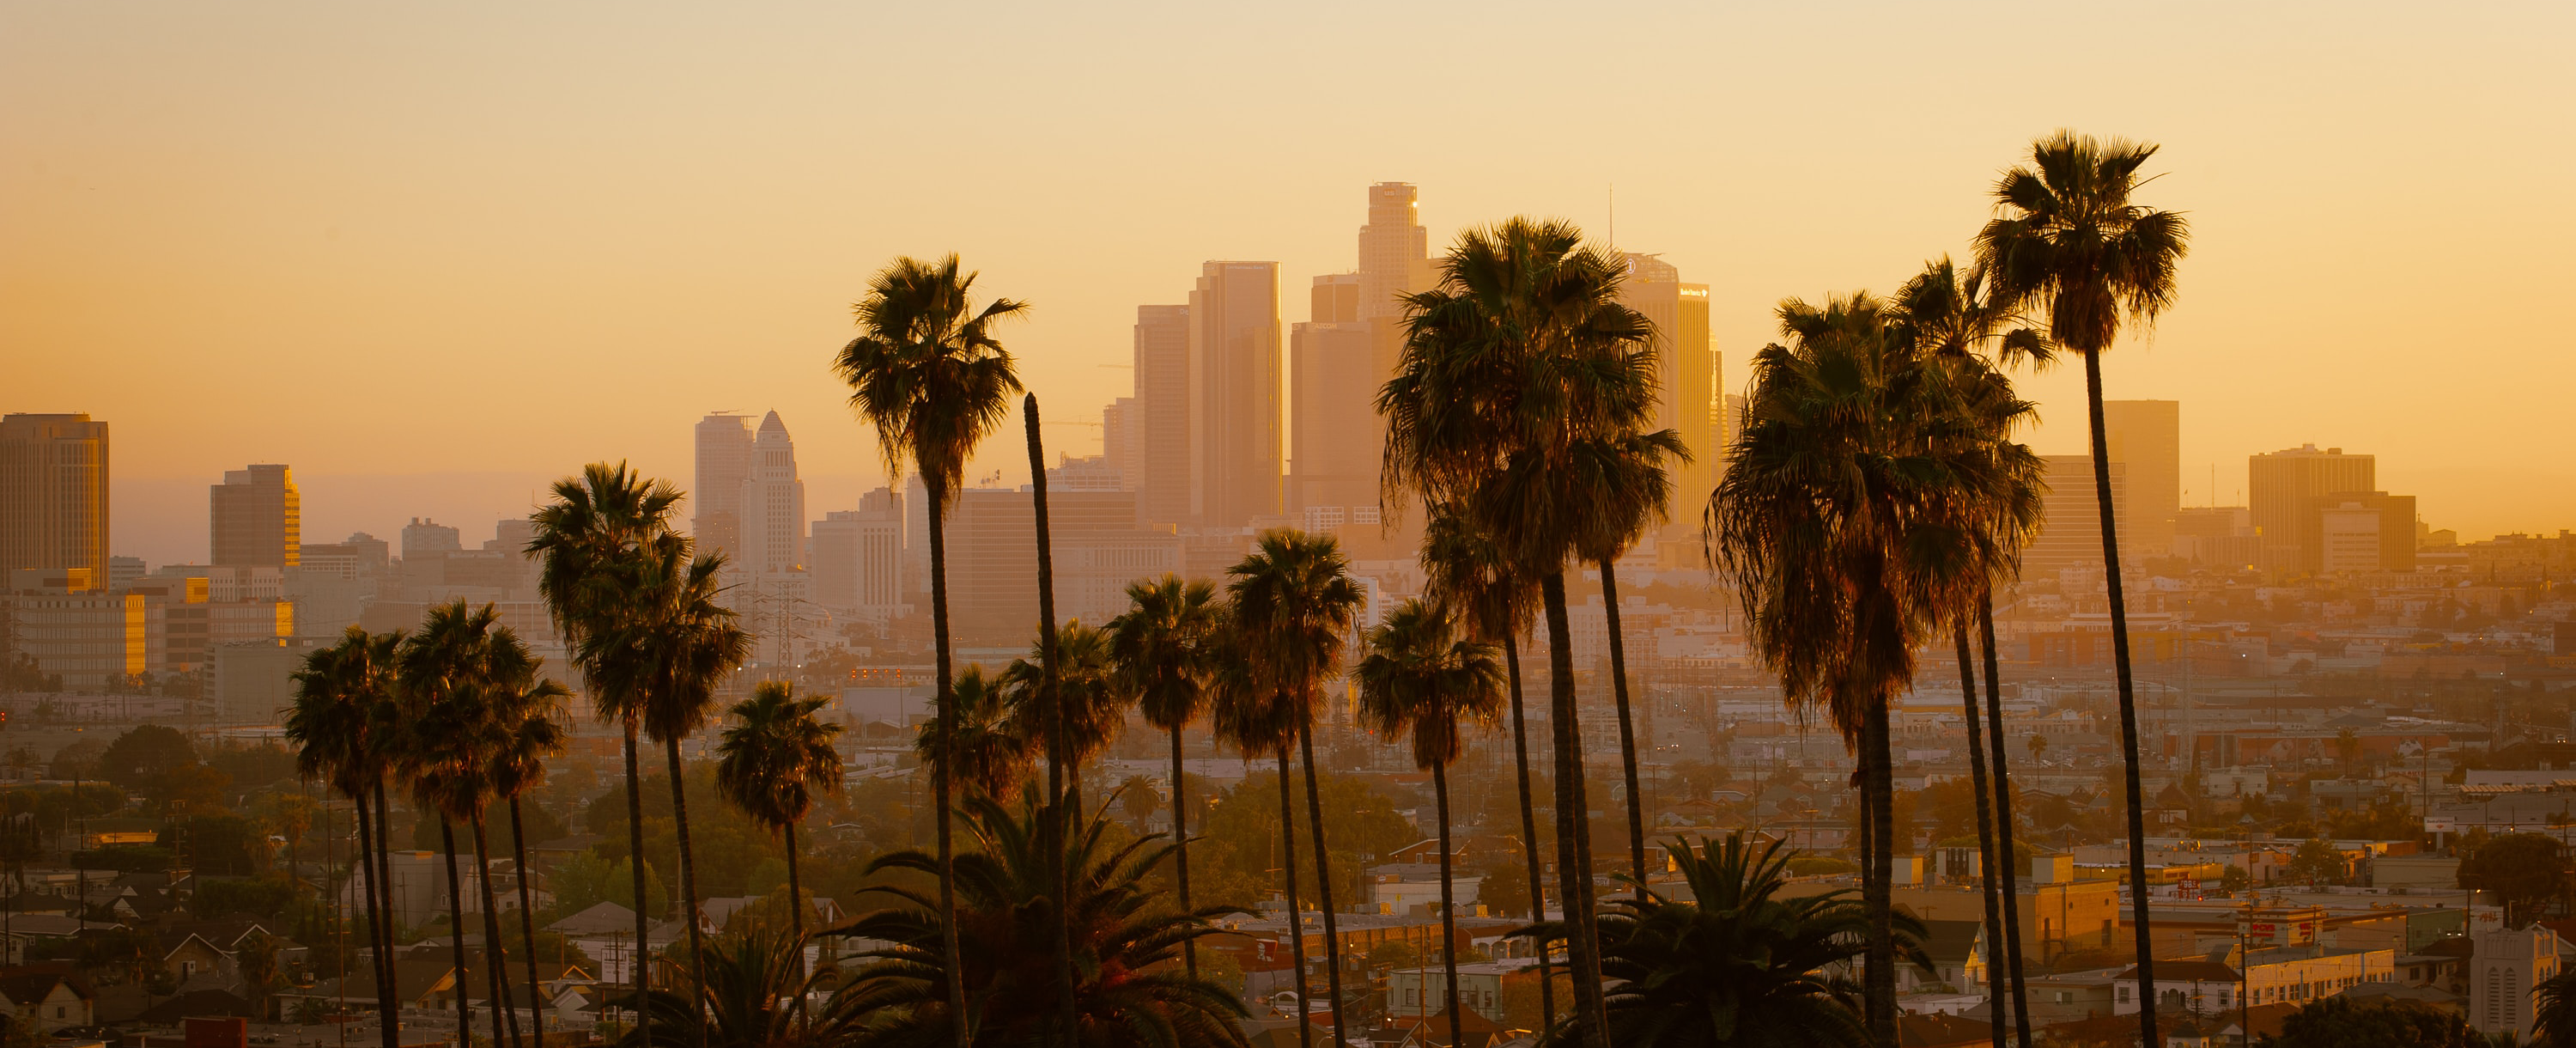 An aerial view of the LA skyline at sunset. The sky is a sherbet orange, and palm trees stand in front of the camera in the middle distance.